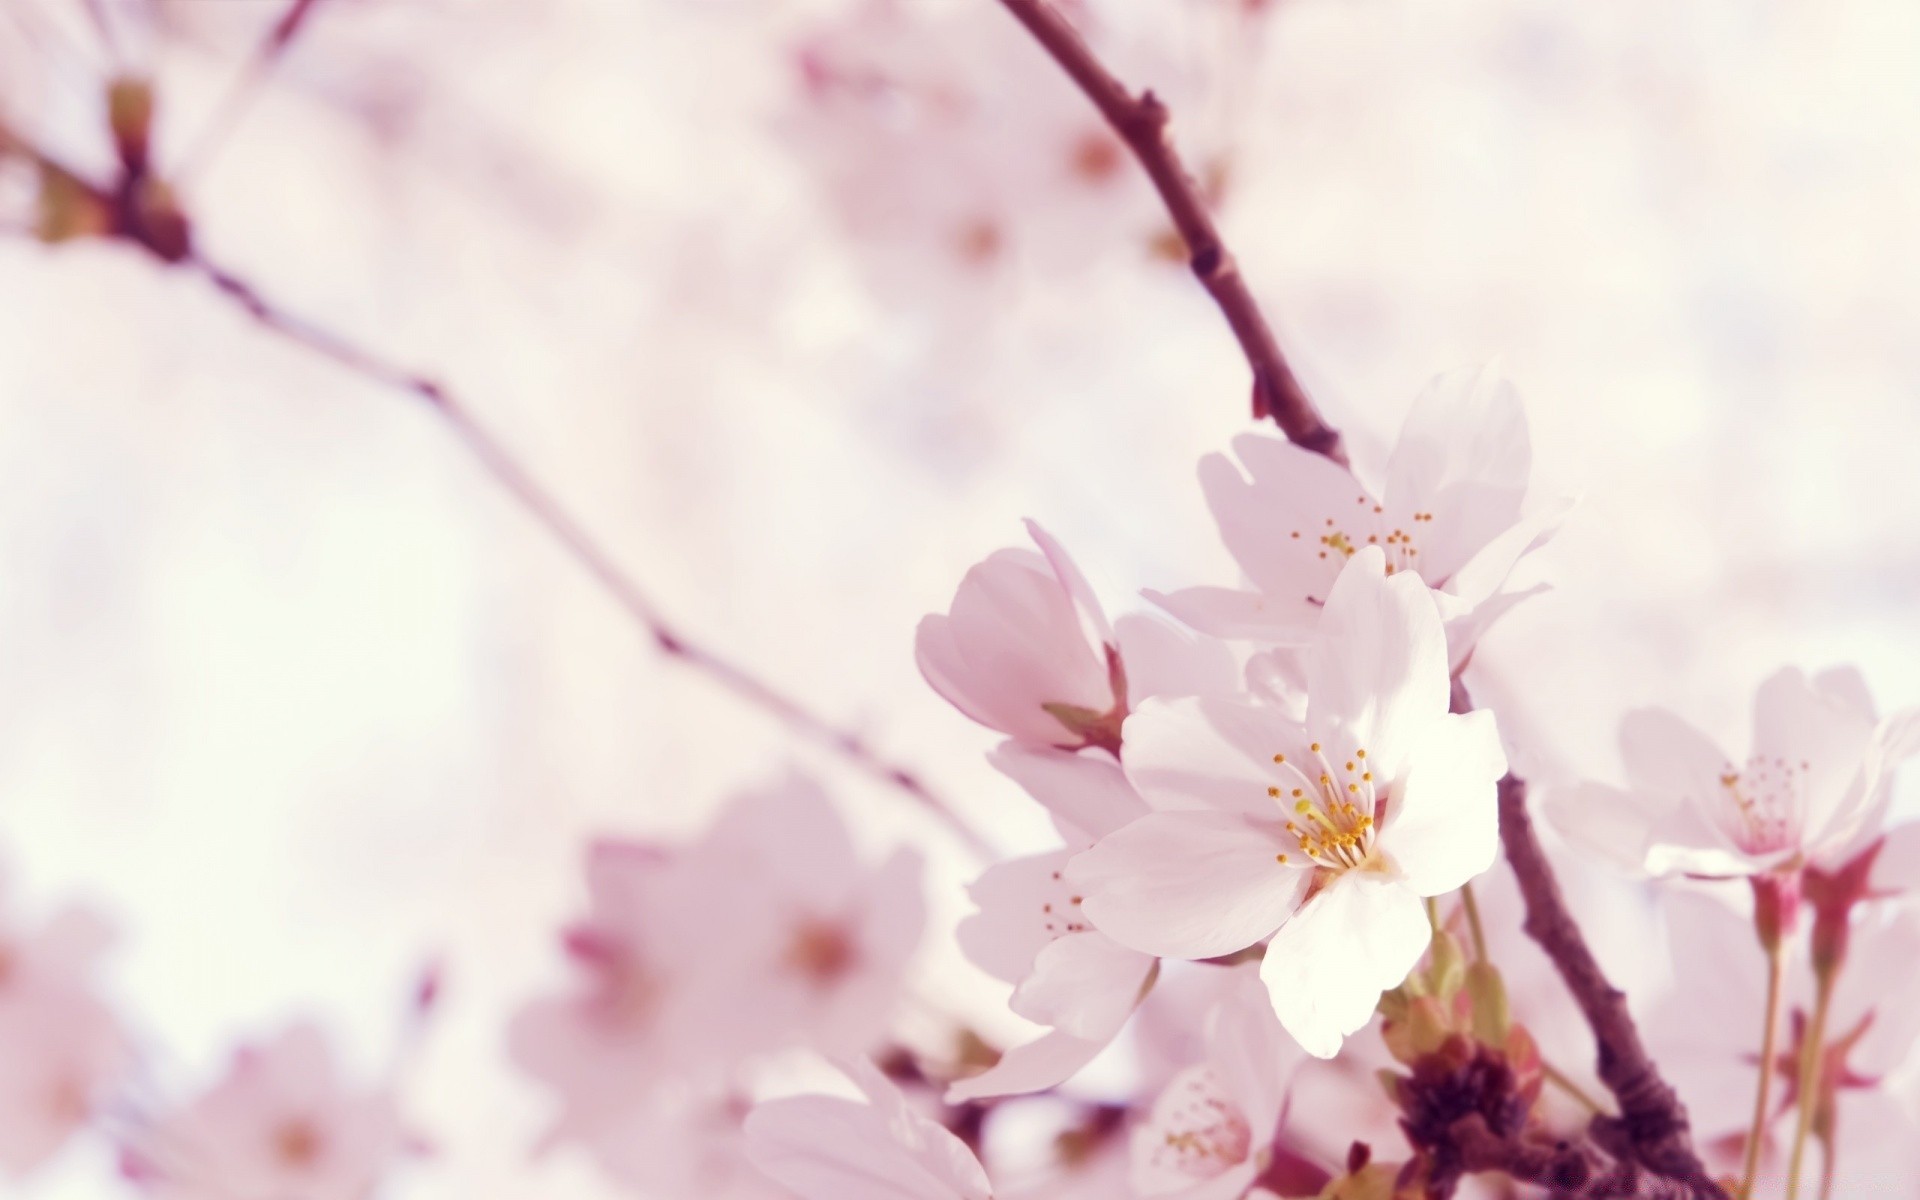 spring flower cherry nature branch flora tree garden blur leaf growth summer bright color bud outdoors petal season blooming delicate